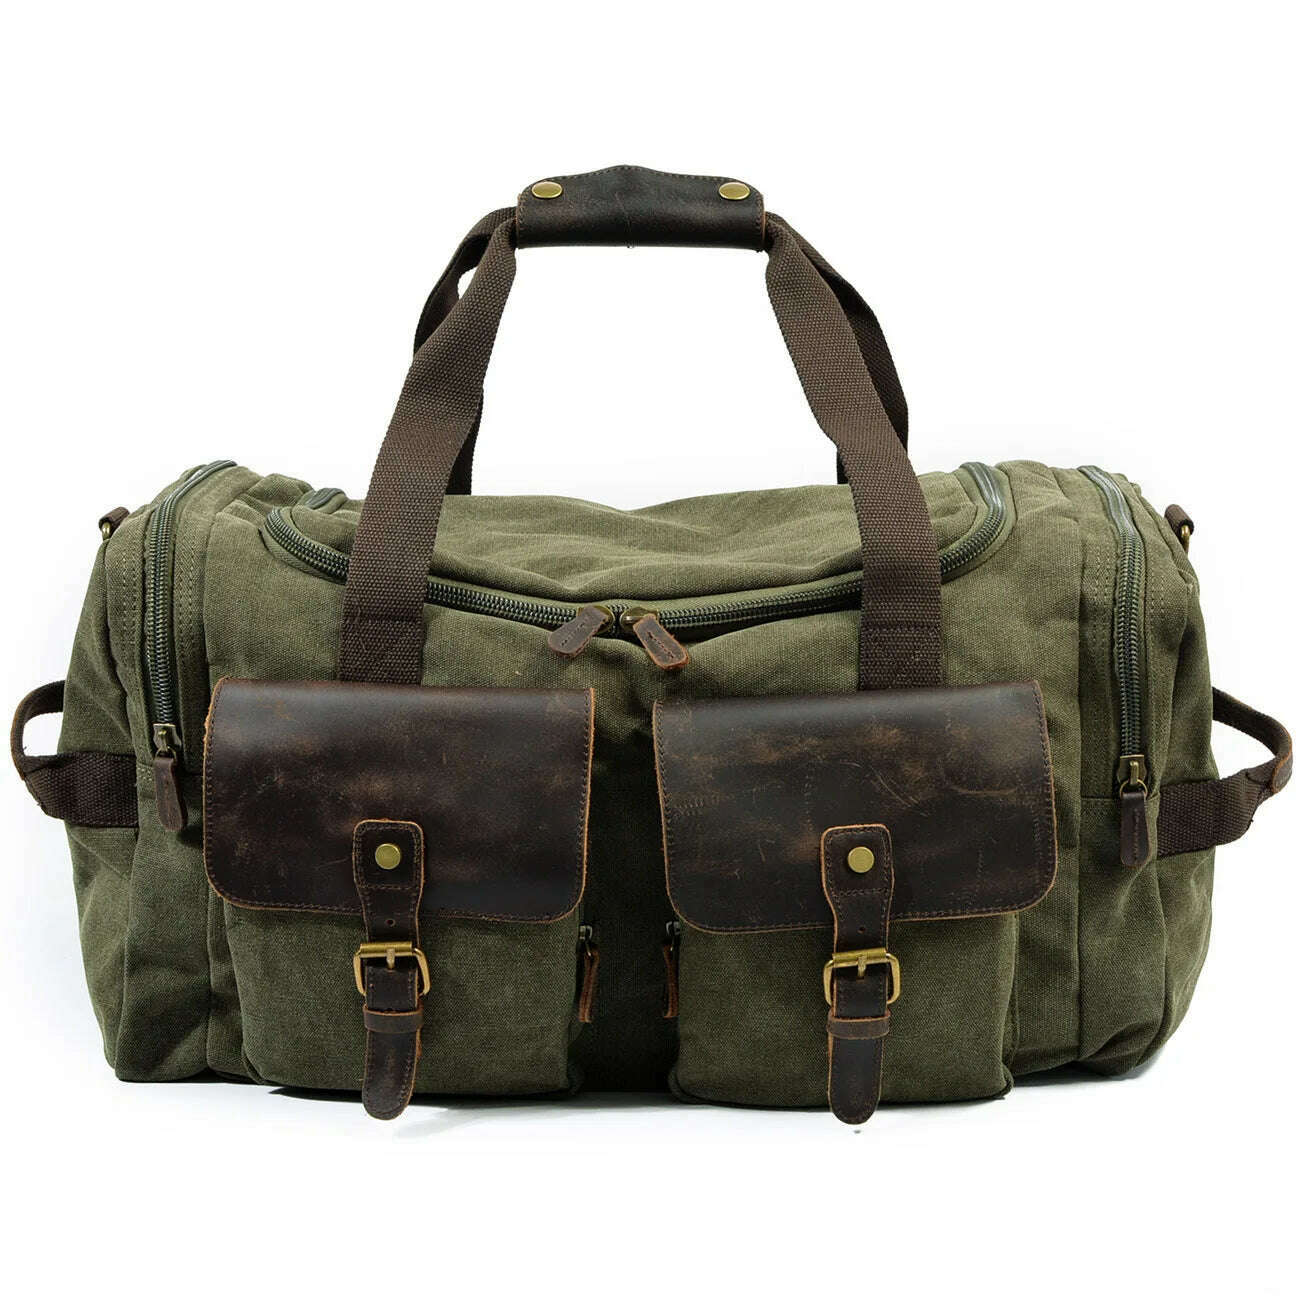 KIMLUD, Canvas bag large capacity for men's handbags leisure wear one shoulder aslant luggage, Army green, KIMLUD Womens Clothes